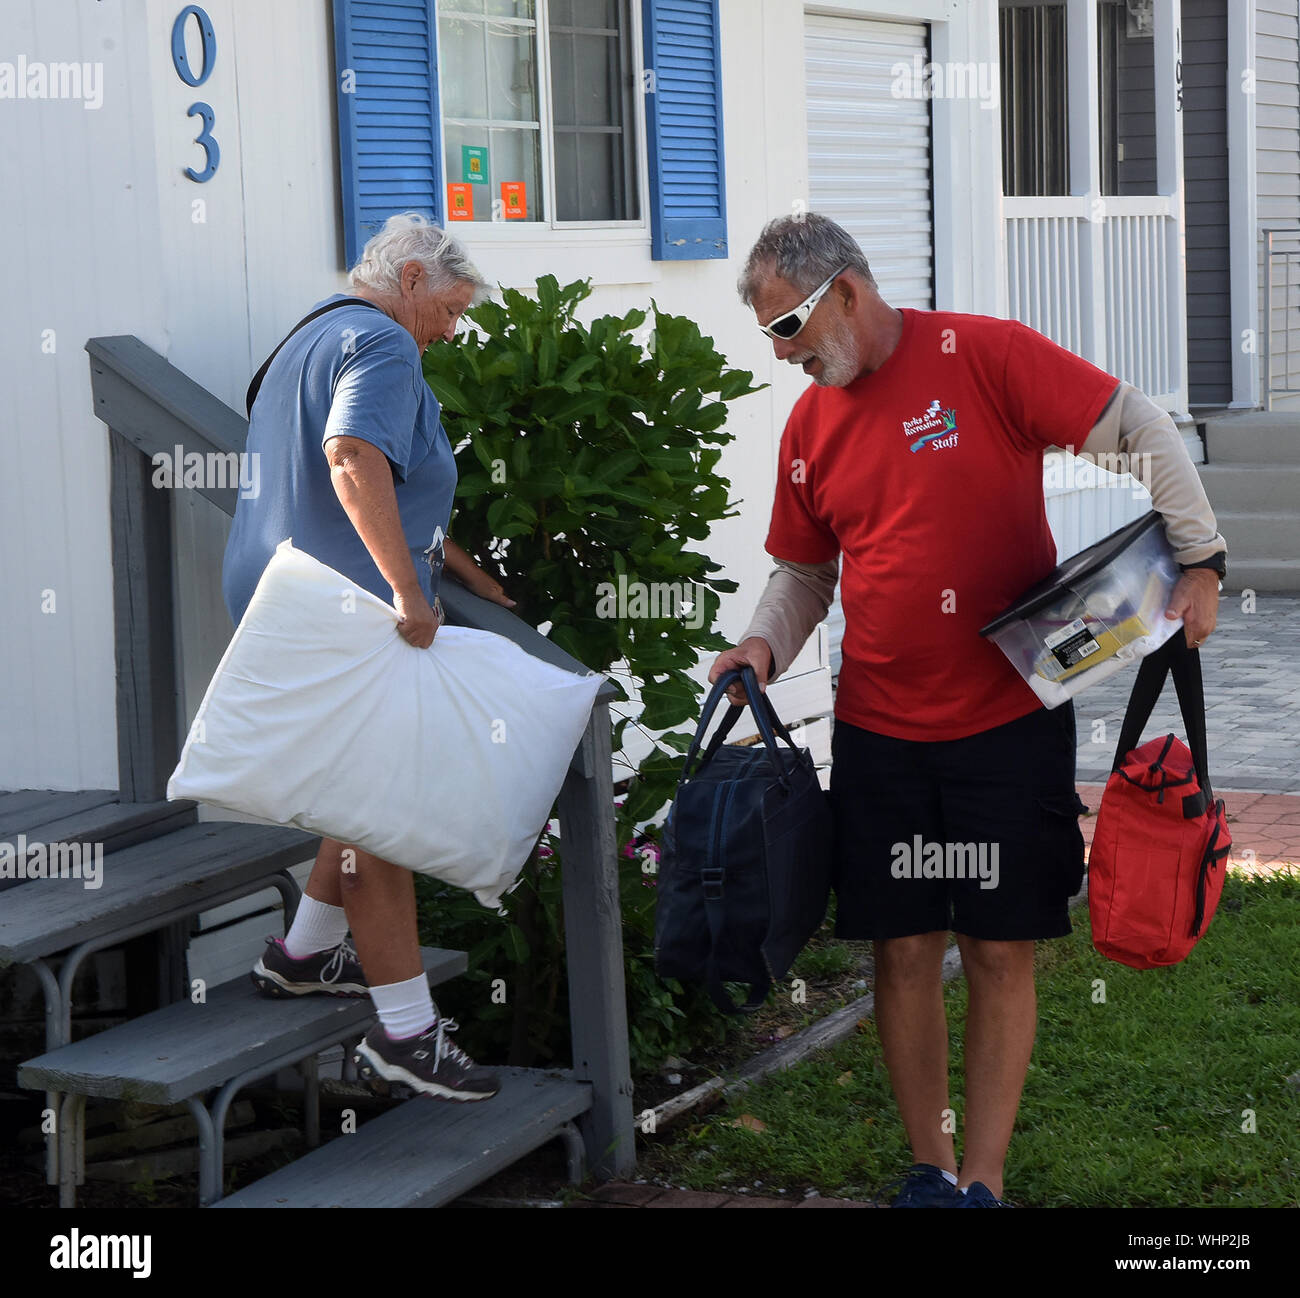 Cape Canaveral, United States. 02nd Sep, 2019. September 2, 2019 - Cape Canaveral, Florida, United States - Don Ingram helps Coleen Casey with her belongings as she leaves her mobile home for an evacuation shelter as Hurricane Dorian is forecast to move dangerously close to the coast to Florida after striking the Bahamas as a Category 5 storm, on September 2, 2019 in Cape Canaveral, Florida. Credit: Paul Hennessy/Alamy Live News Stock Photo